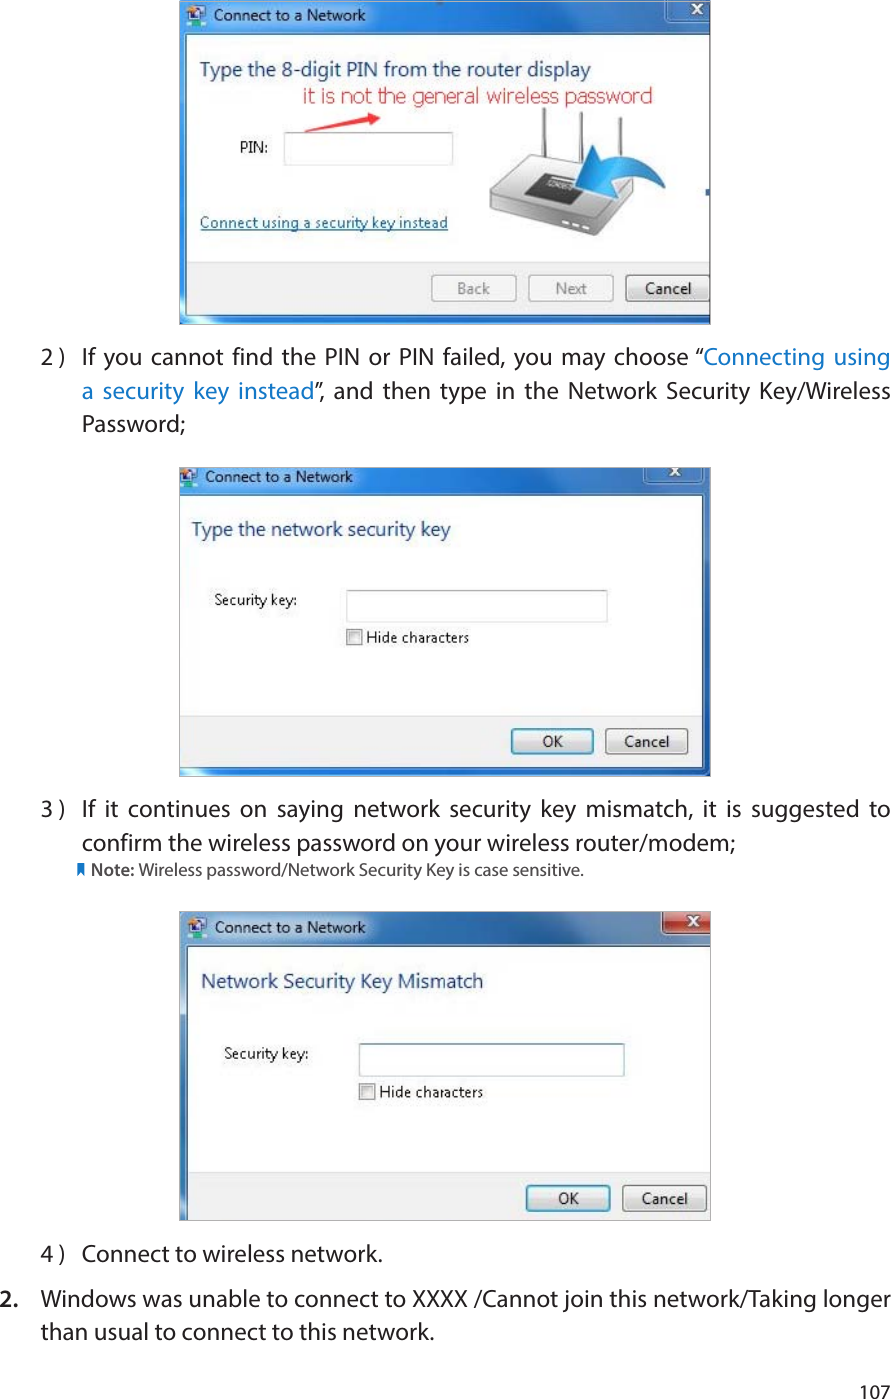 1072 )  If you cannot find the PIN or PIN failed, you may choose “Connecting using a security key instead”, and then type in the Network Security Key/Wireless Password;3 )  If it continues on saying network security key mismatch, it is suggested to confirm the wireless password on your wireless router/modem;            Note: Wireless password/Network Security Key is case sensitive.4 )  Connect to wireless network.2.  Windows was unable to connect to XXXX /Cannot join this network/Taking longer than usual to connect to this network.